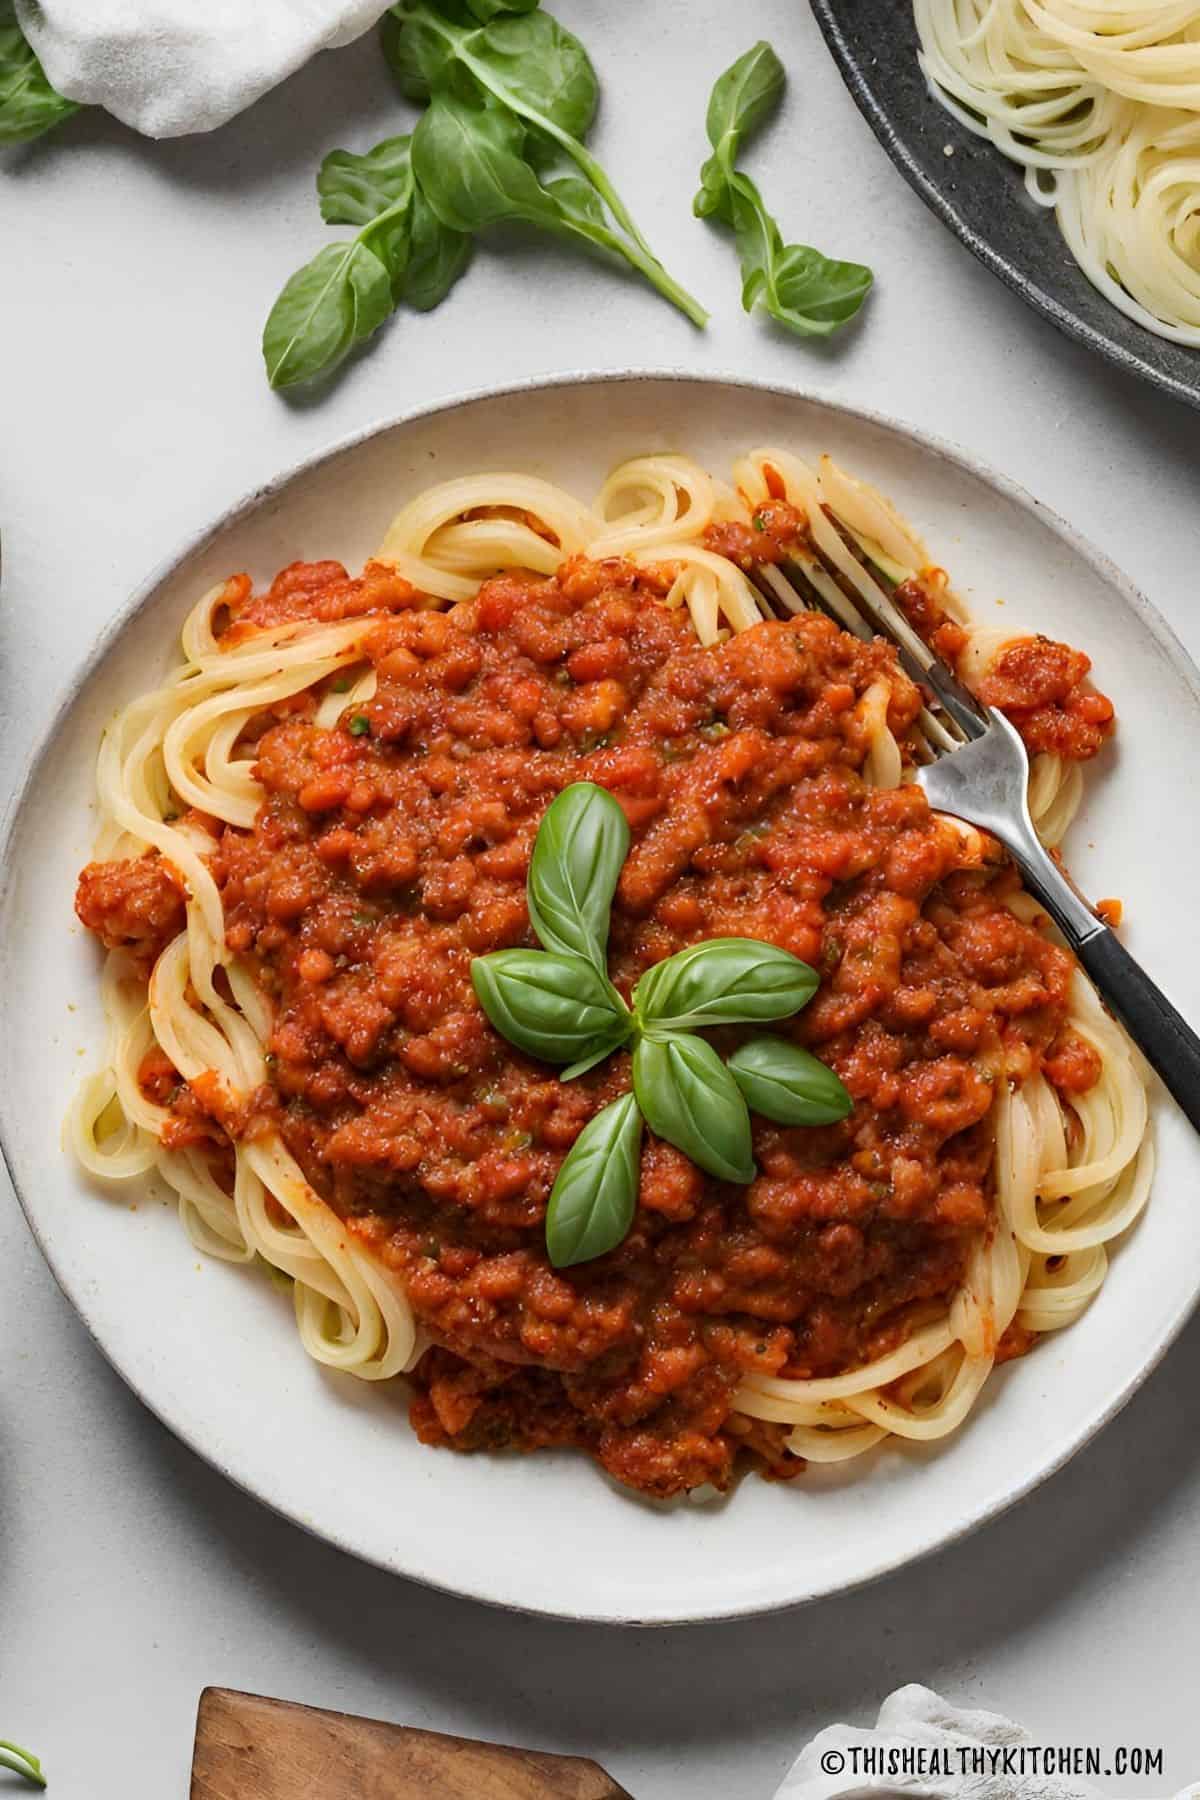 Plate of spaghetti with vegan bolognese sauce on top.